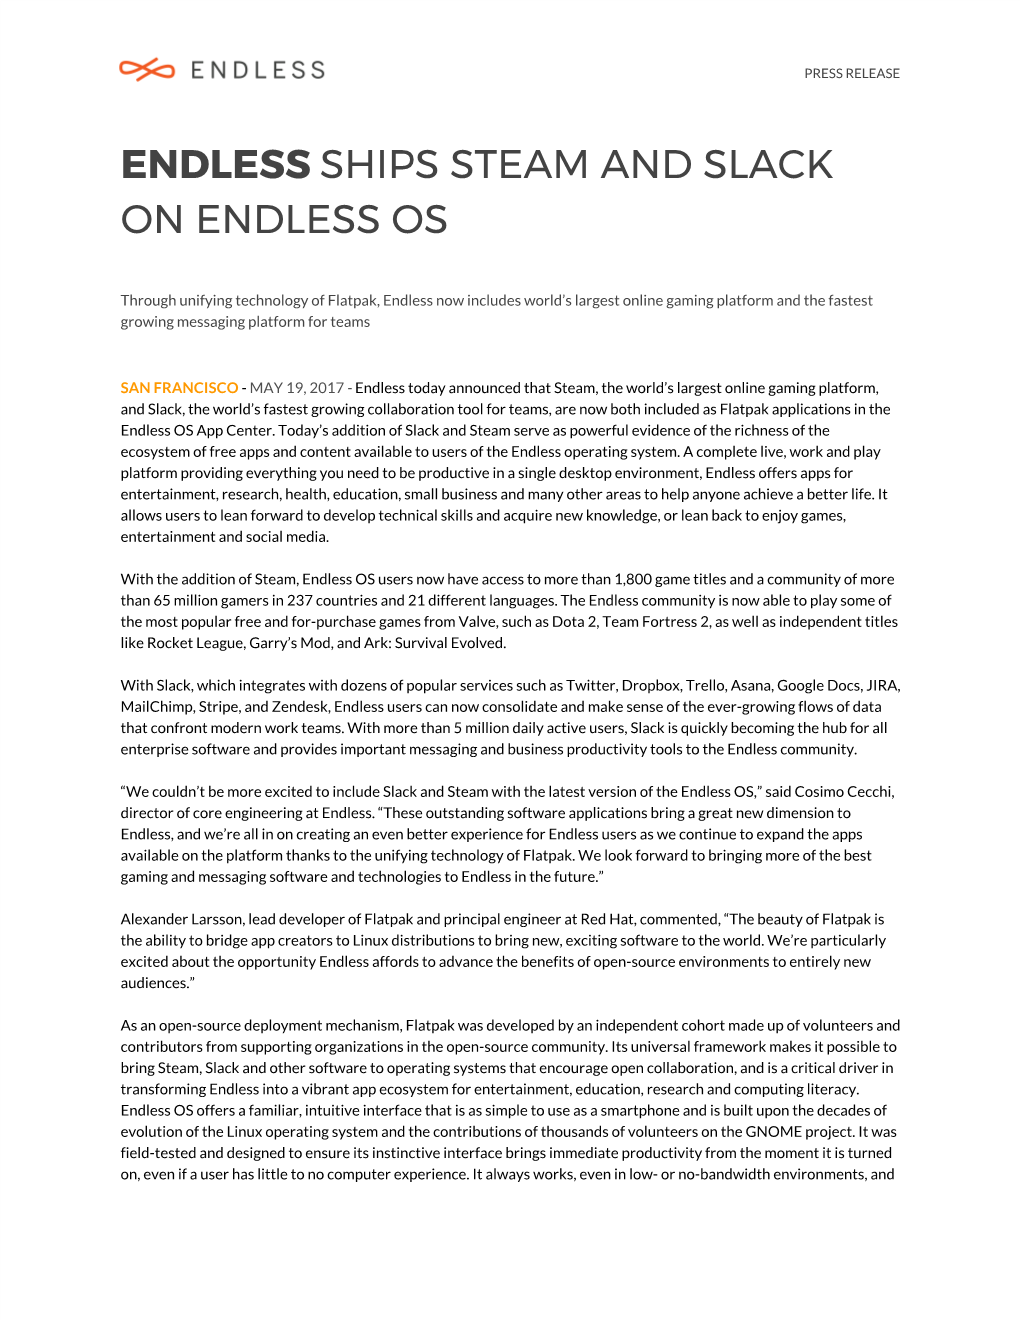 Endless ​Ships Steam and Slack on Endless Os